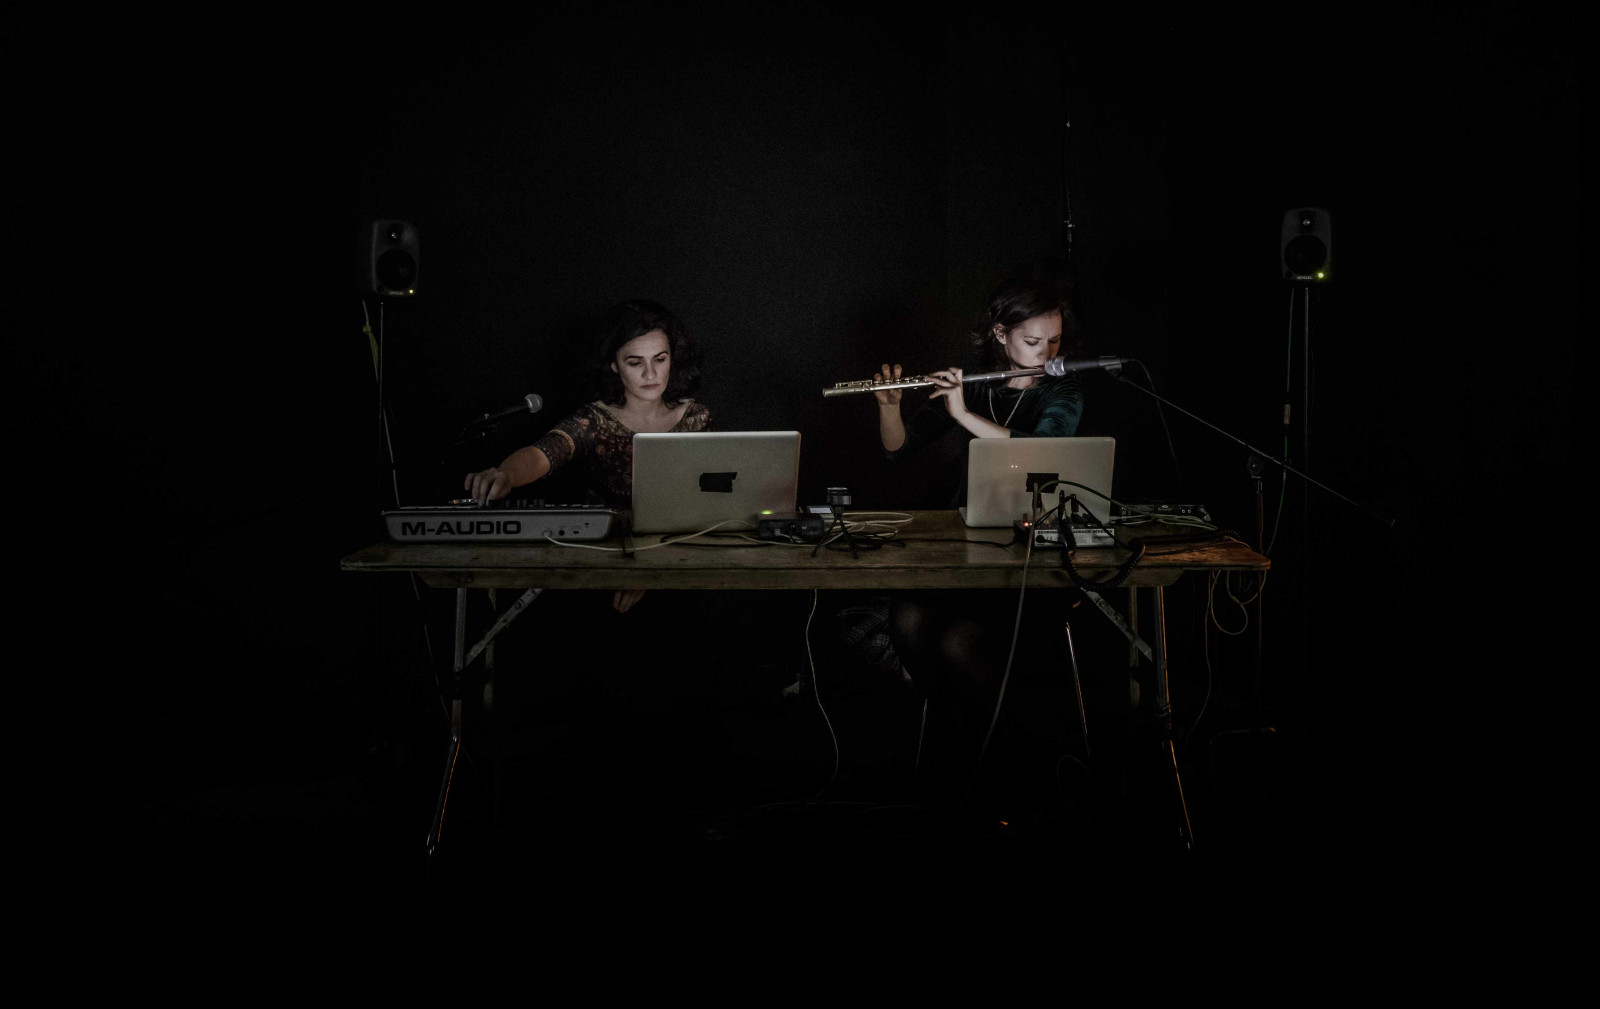 Reports to an Academy: Live electronic performance by Linda & Irene Buckley, RHA, Dublin, 2015. Photo: Mike Hannon.